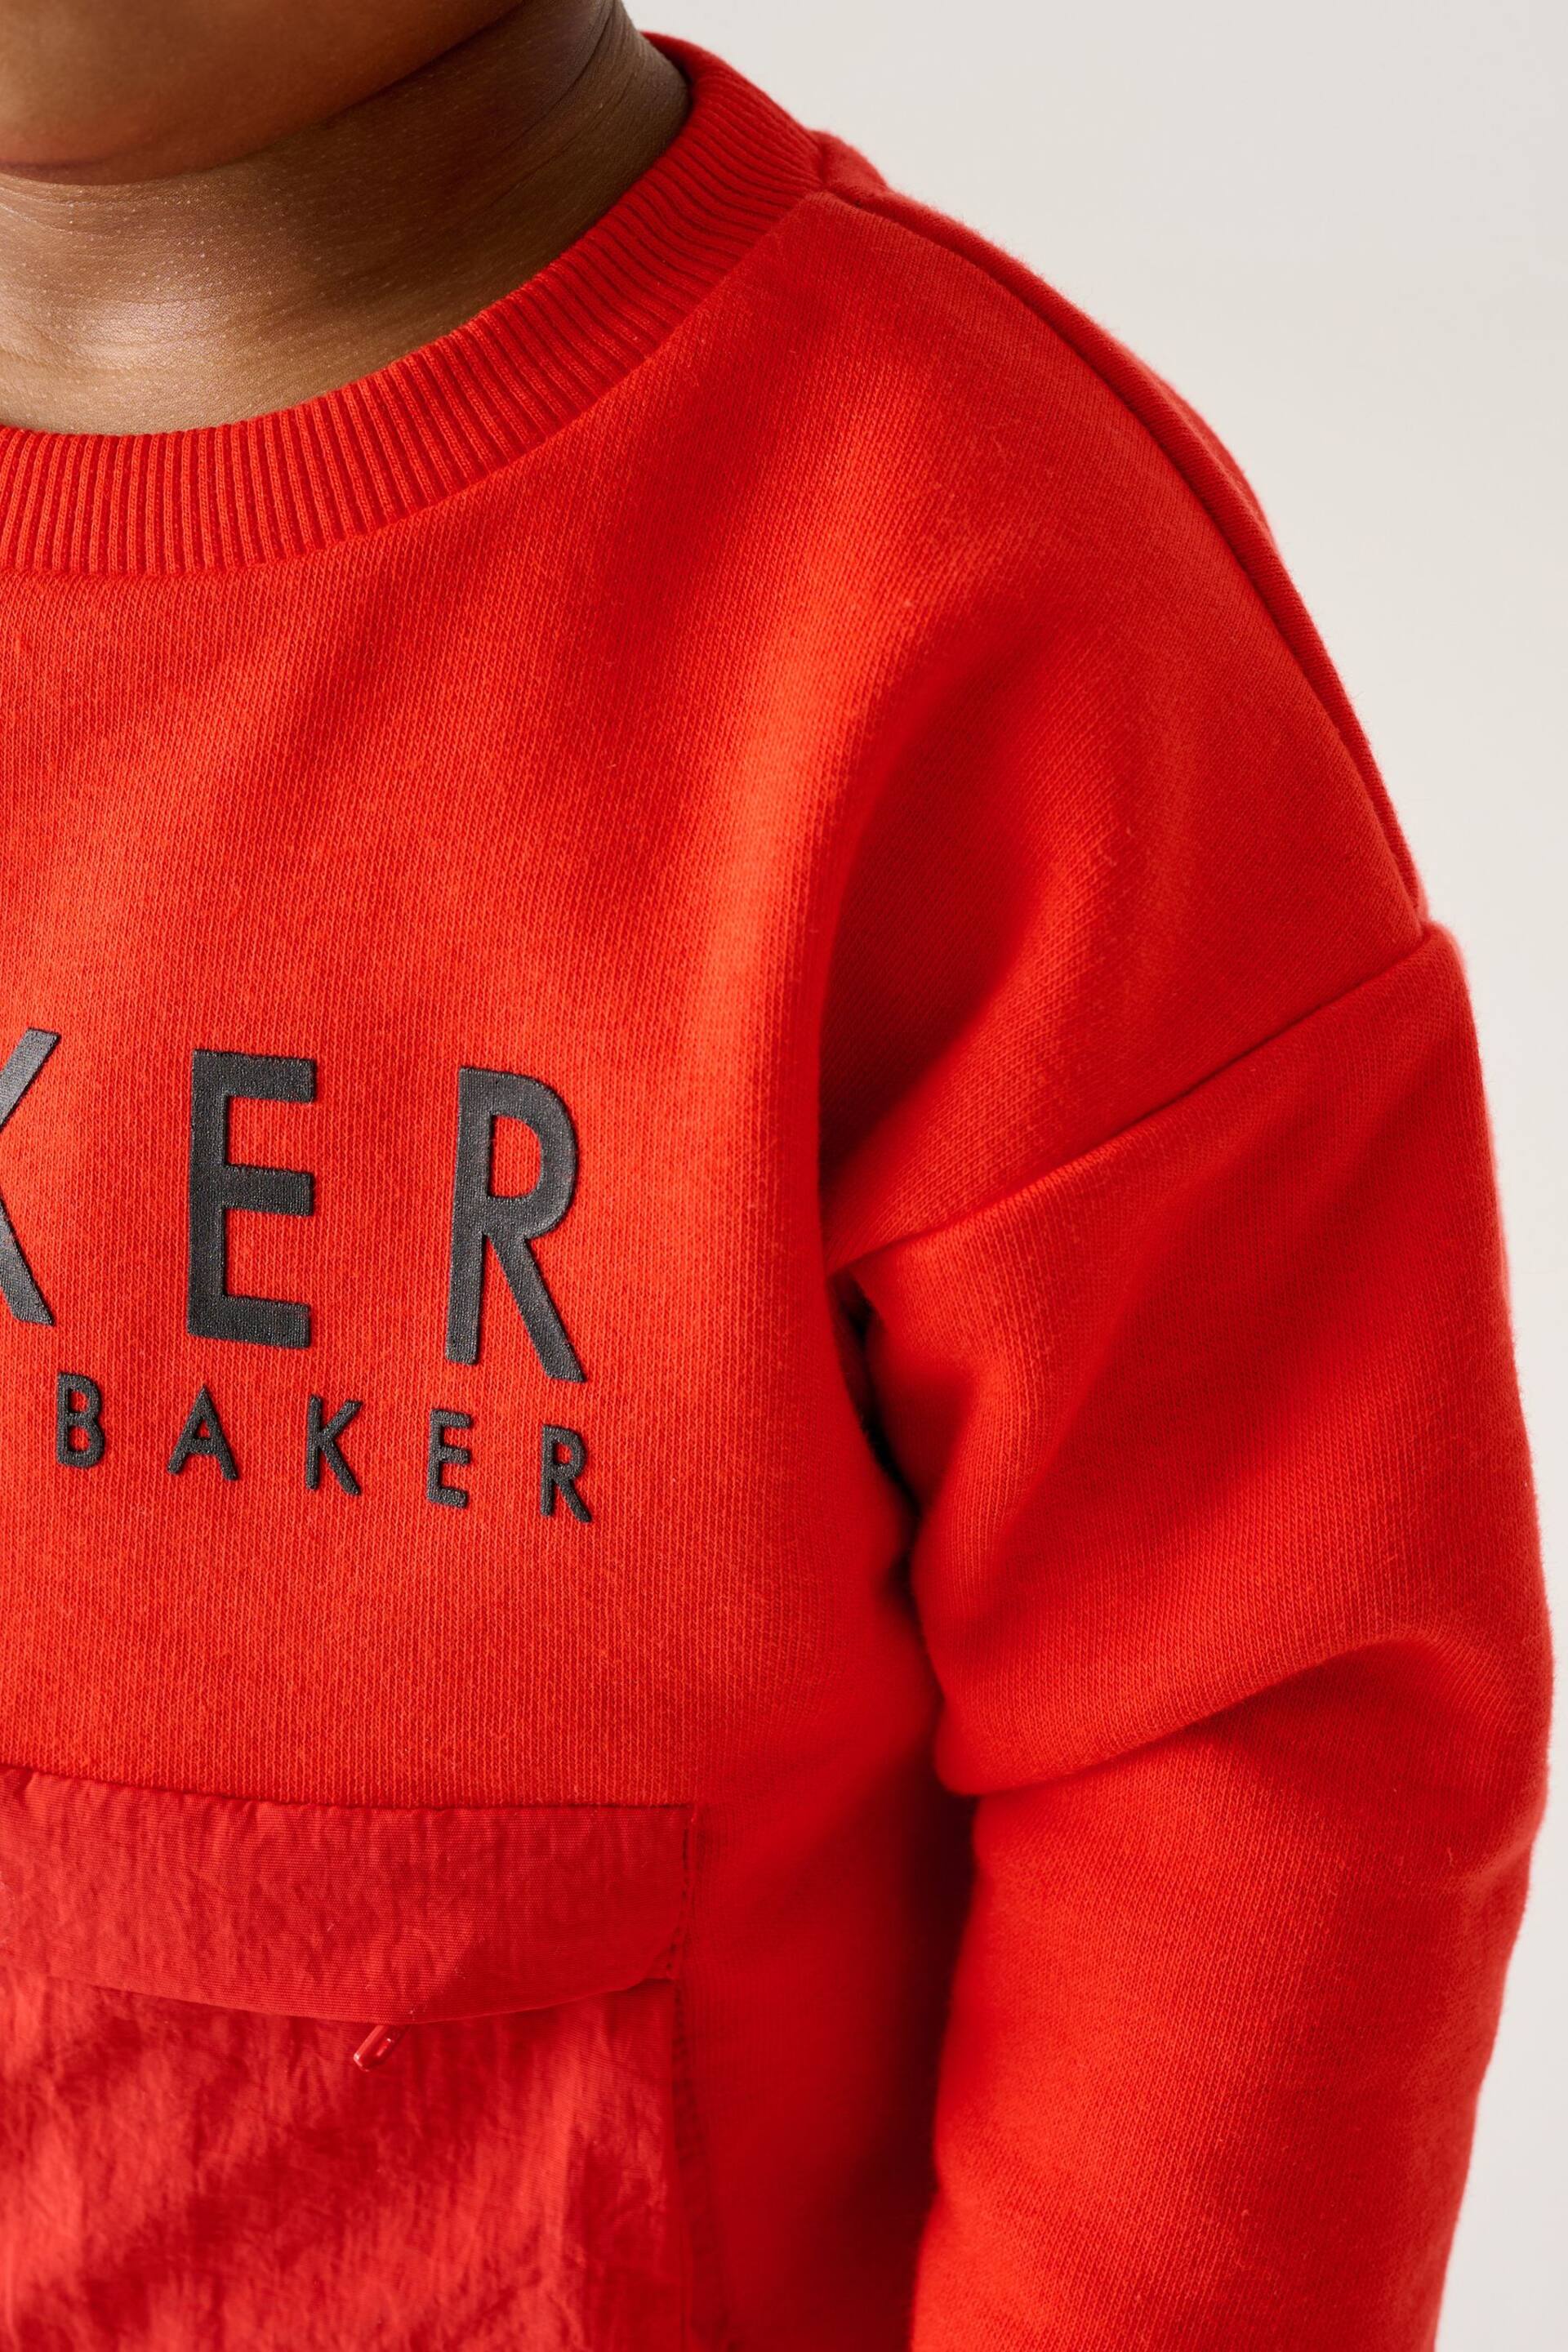 Baker by Ted Baker Red Nylon Sweatshirt and Short Set - Image 4 of 9